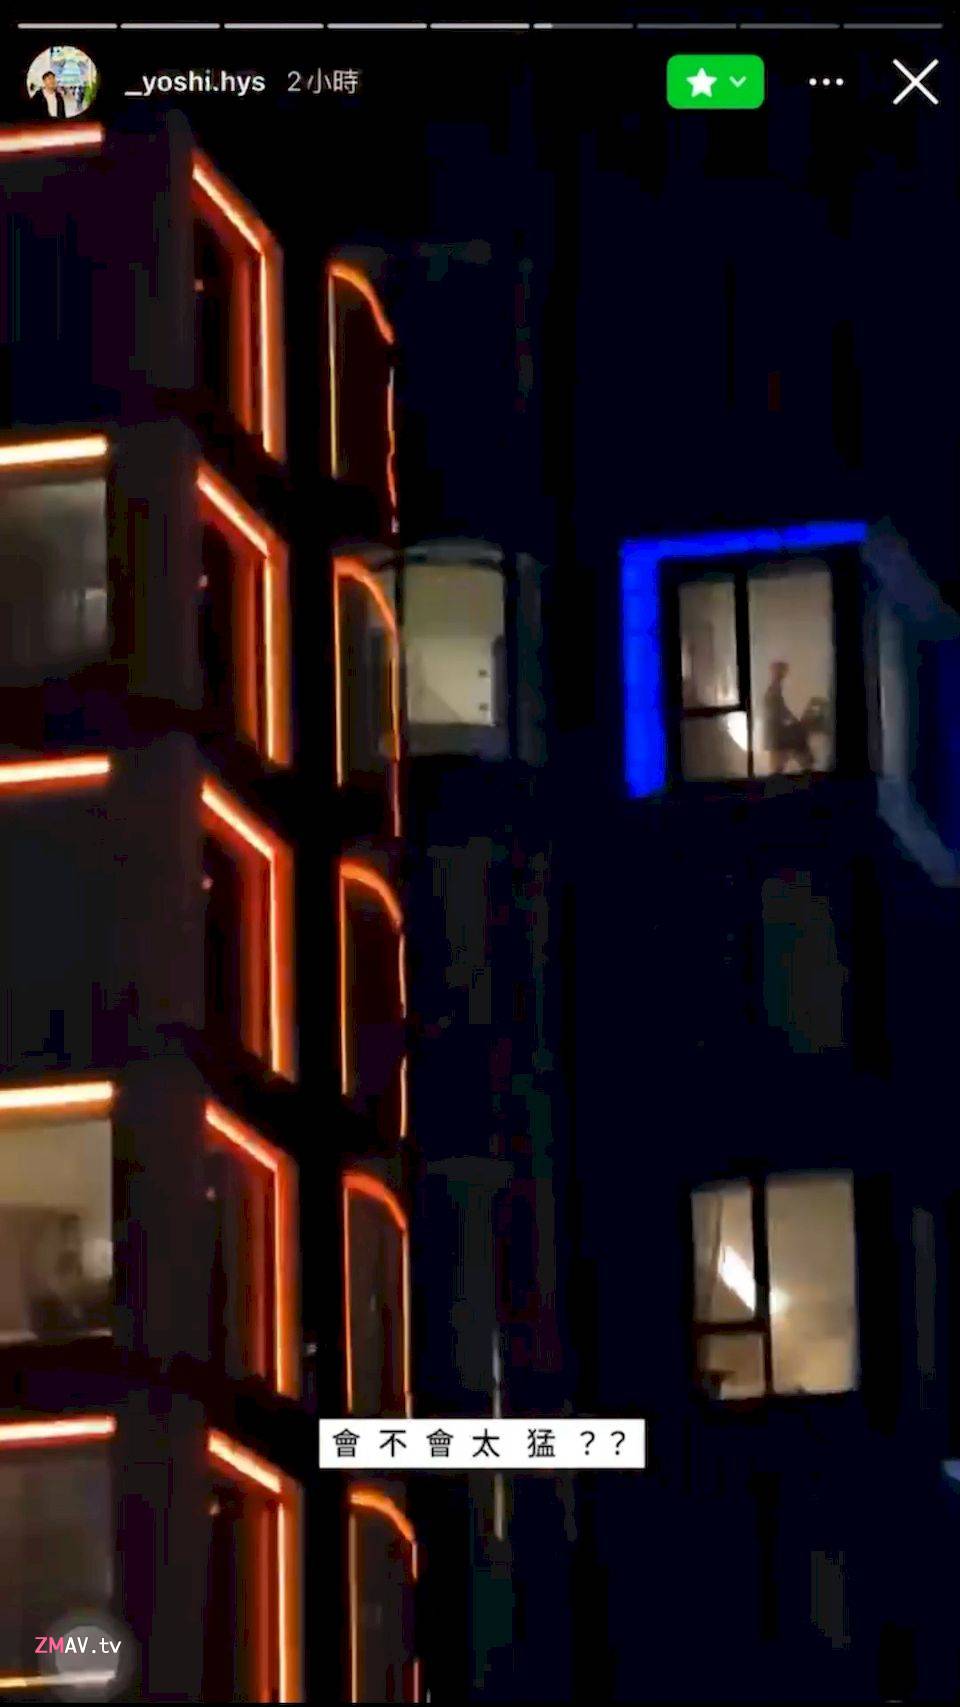 couple having sex in window goes viral